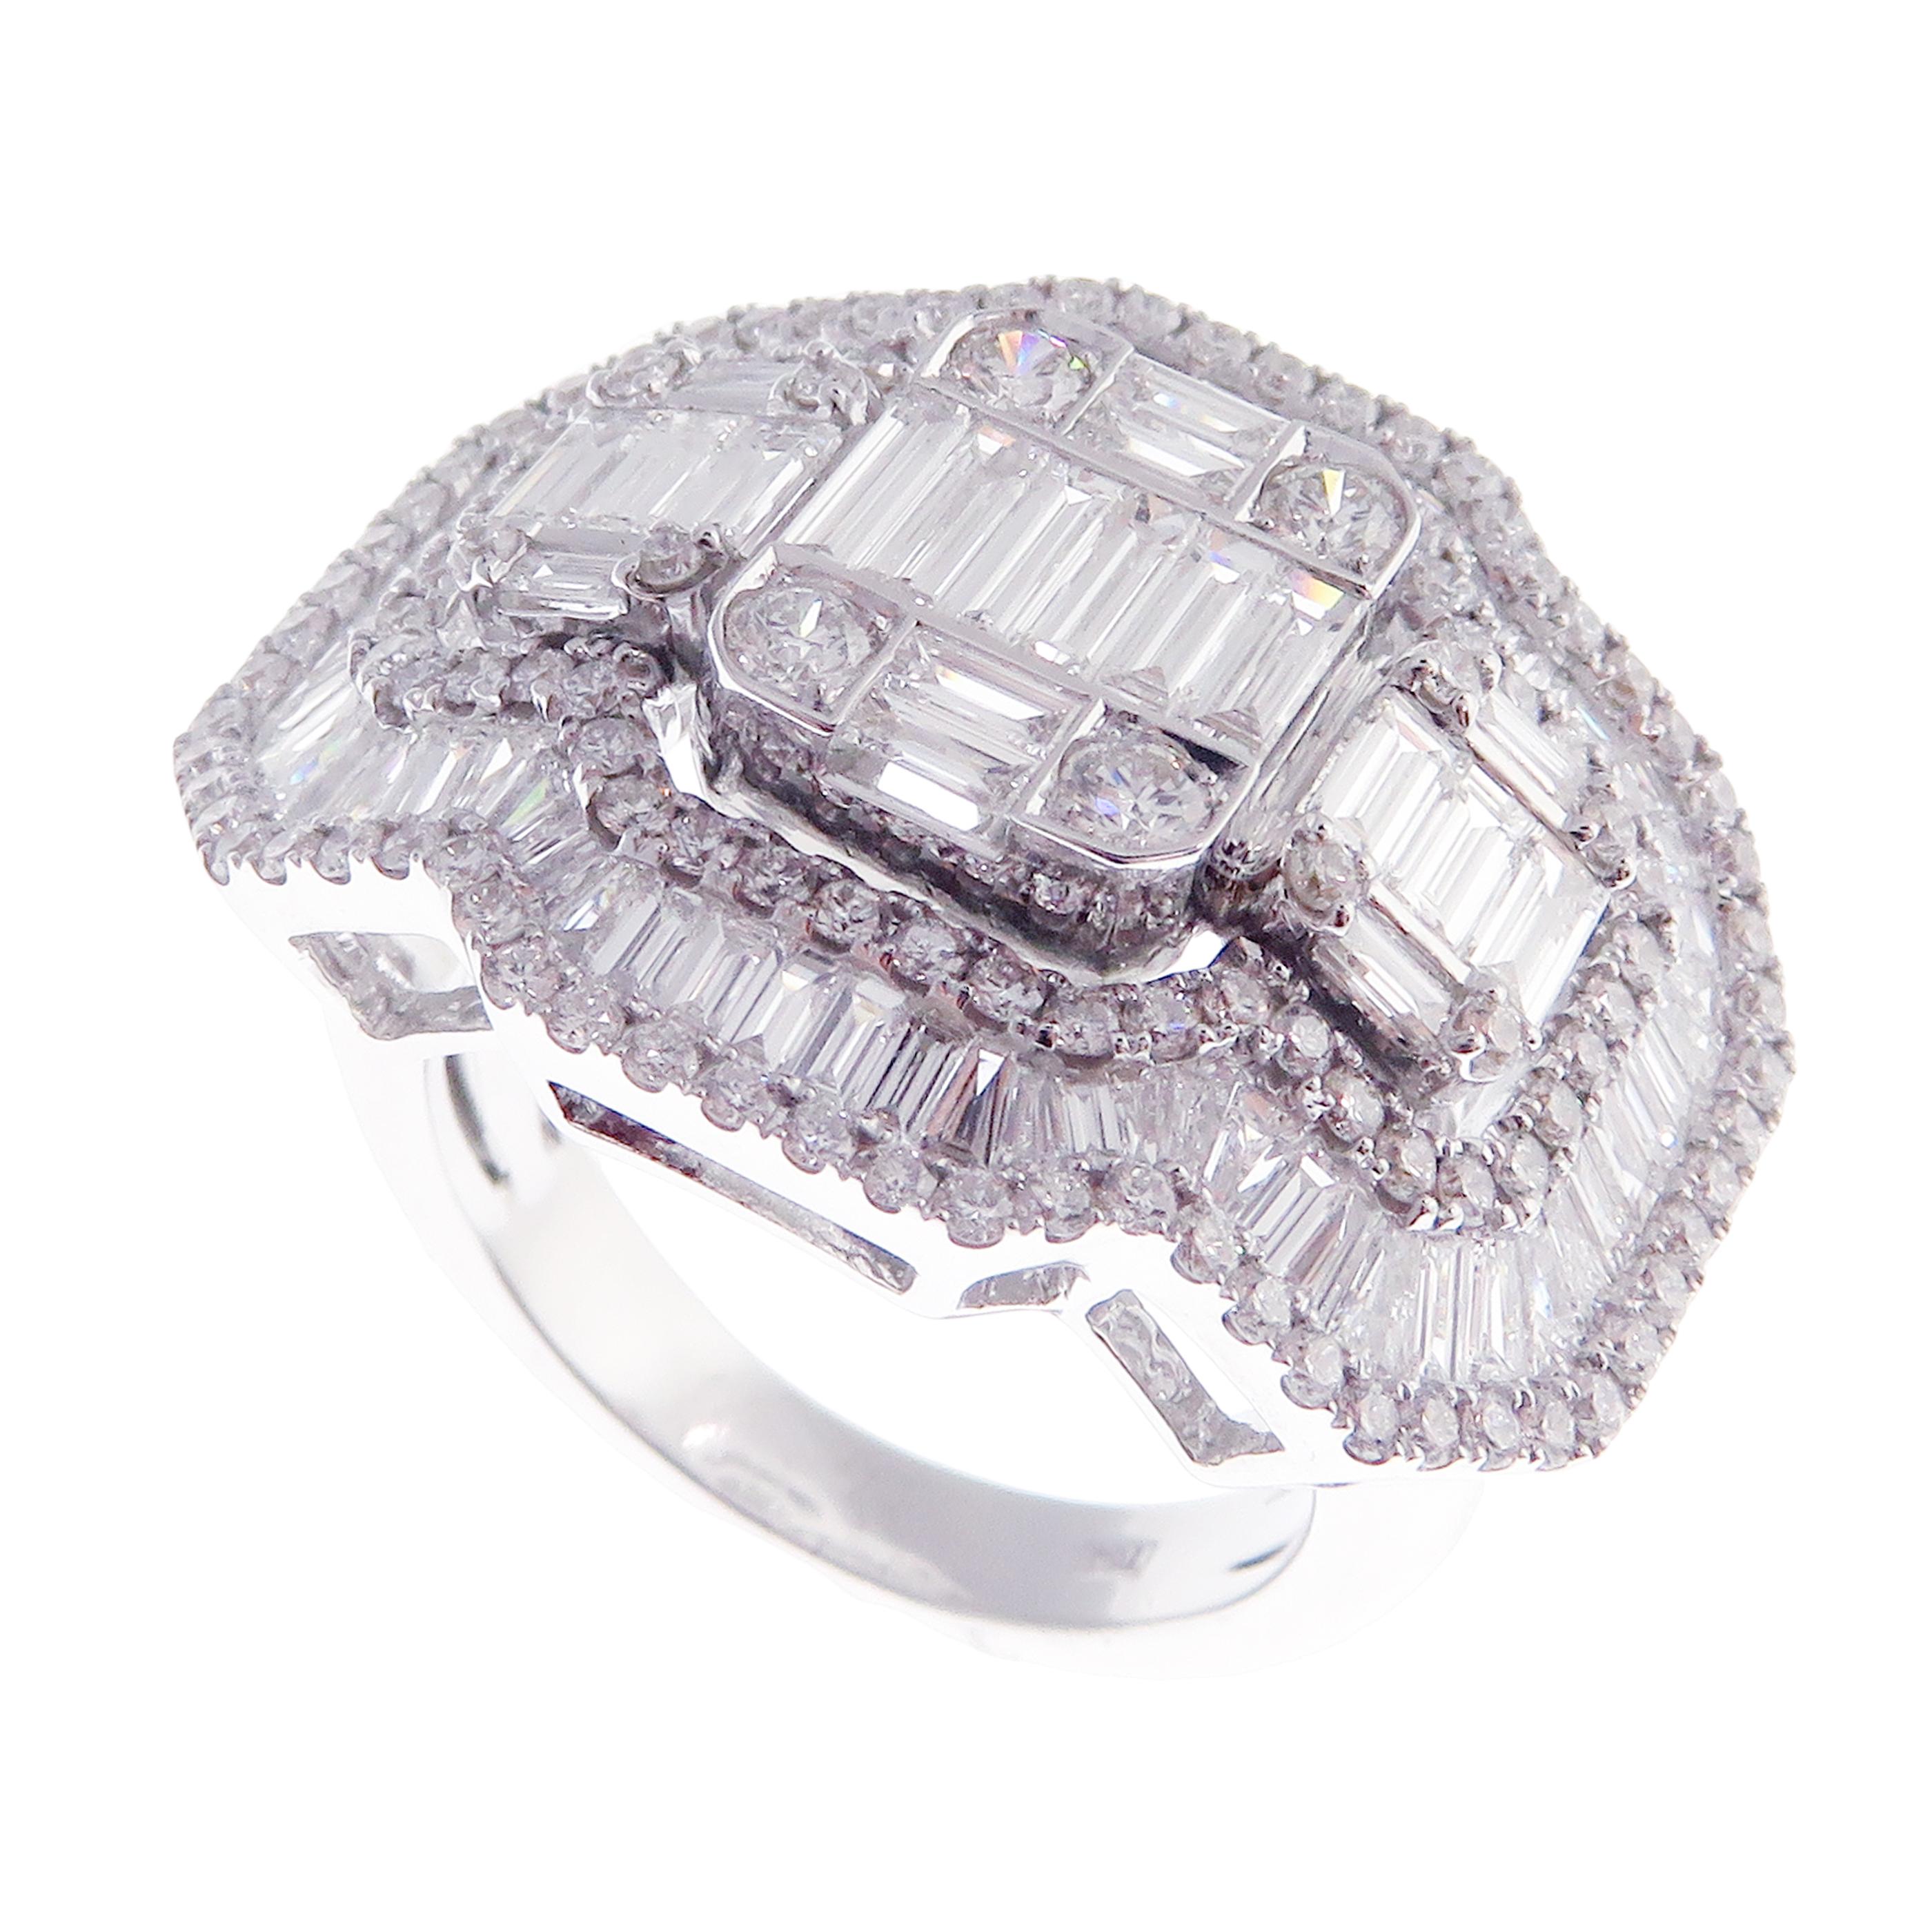 This baguette, diamond ring is crafted in 18-karat white gold, weighing approximately 3.32 total carats of SI-V Quality white diamonds. This ring is comfortable and can be sized 